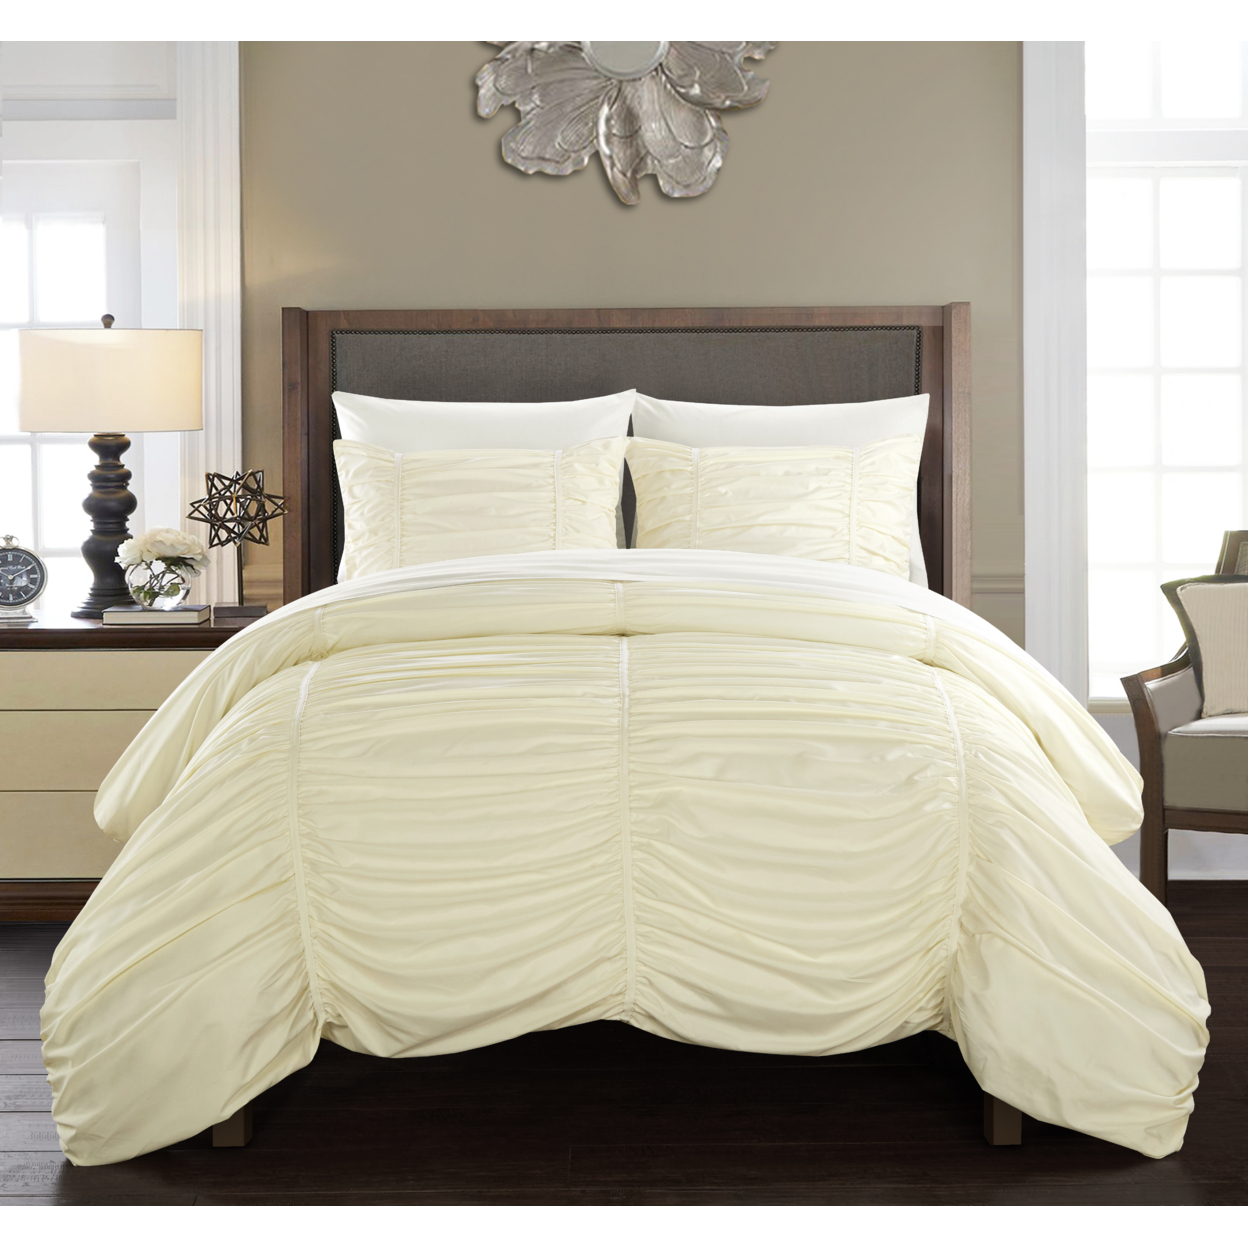 Kiela 2 Pc Or 3 Pc Ruched Comforter Set - Coral, Twin